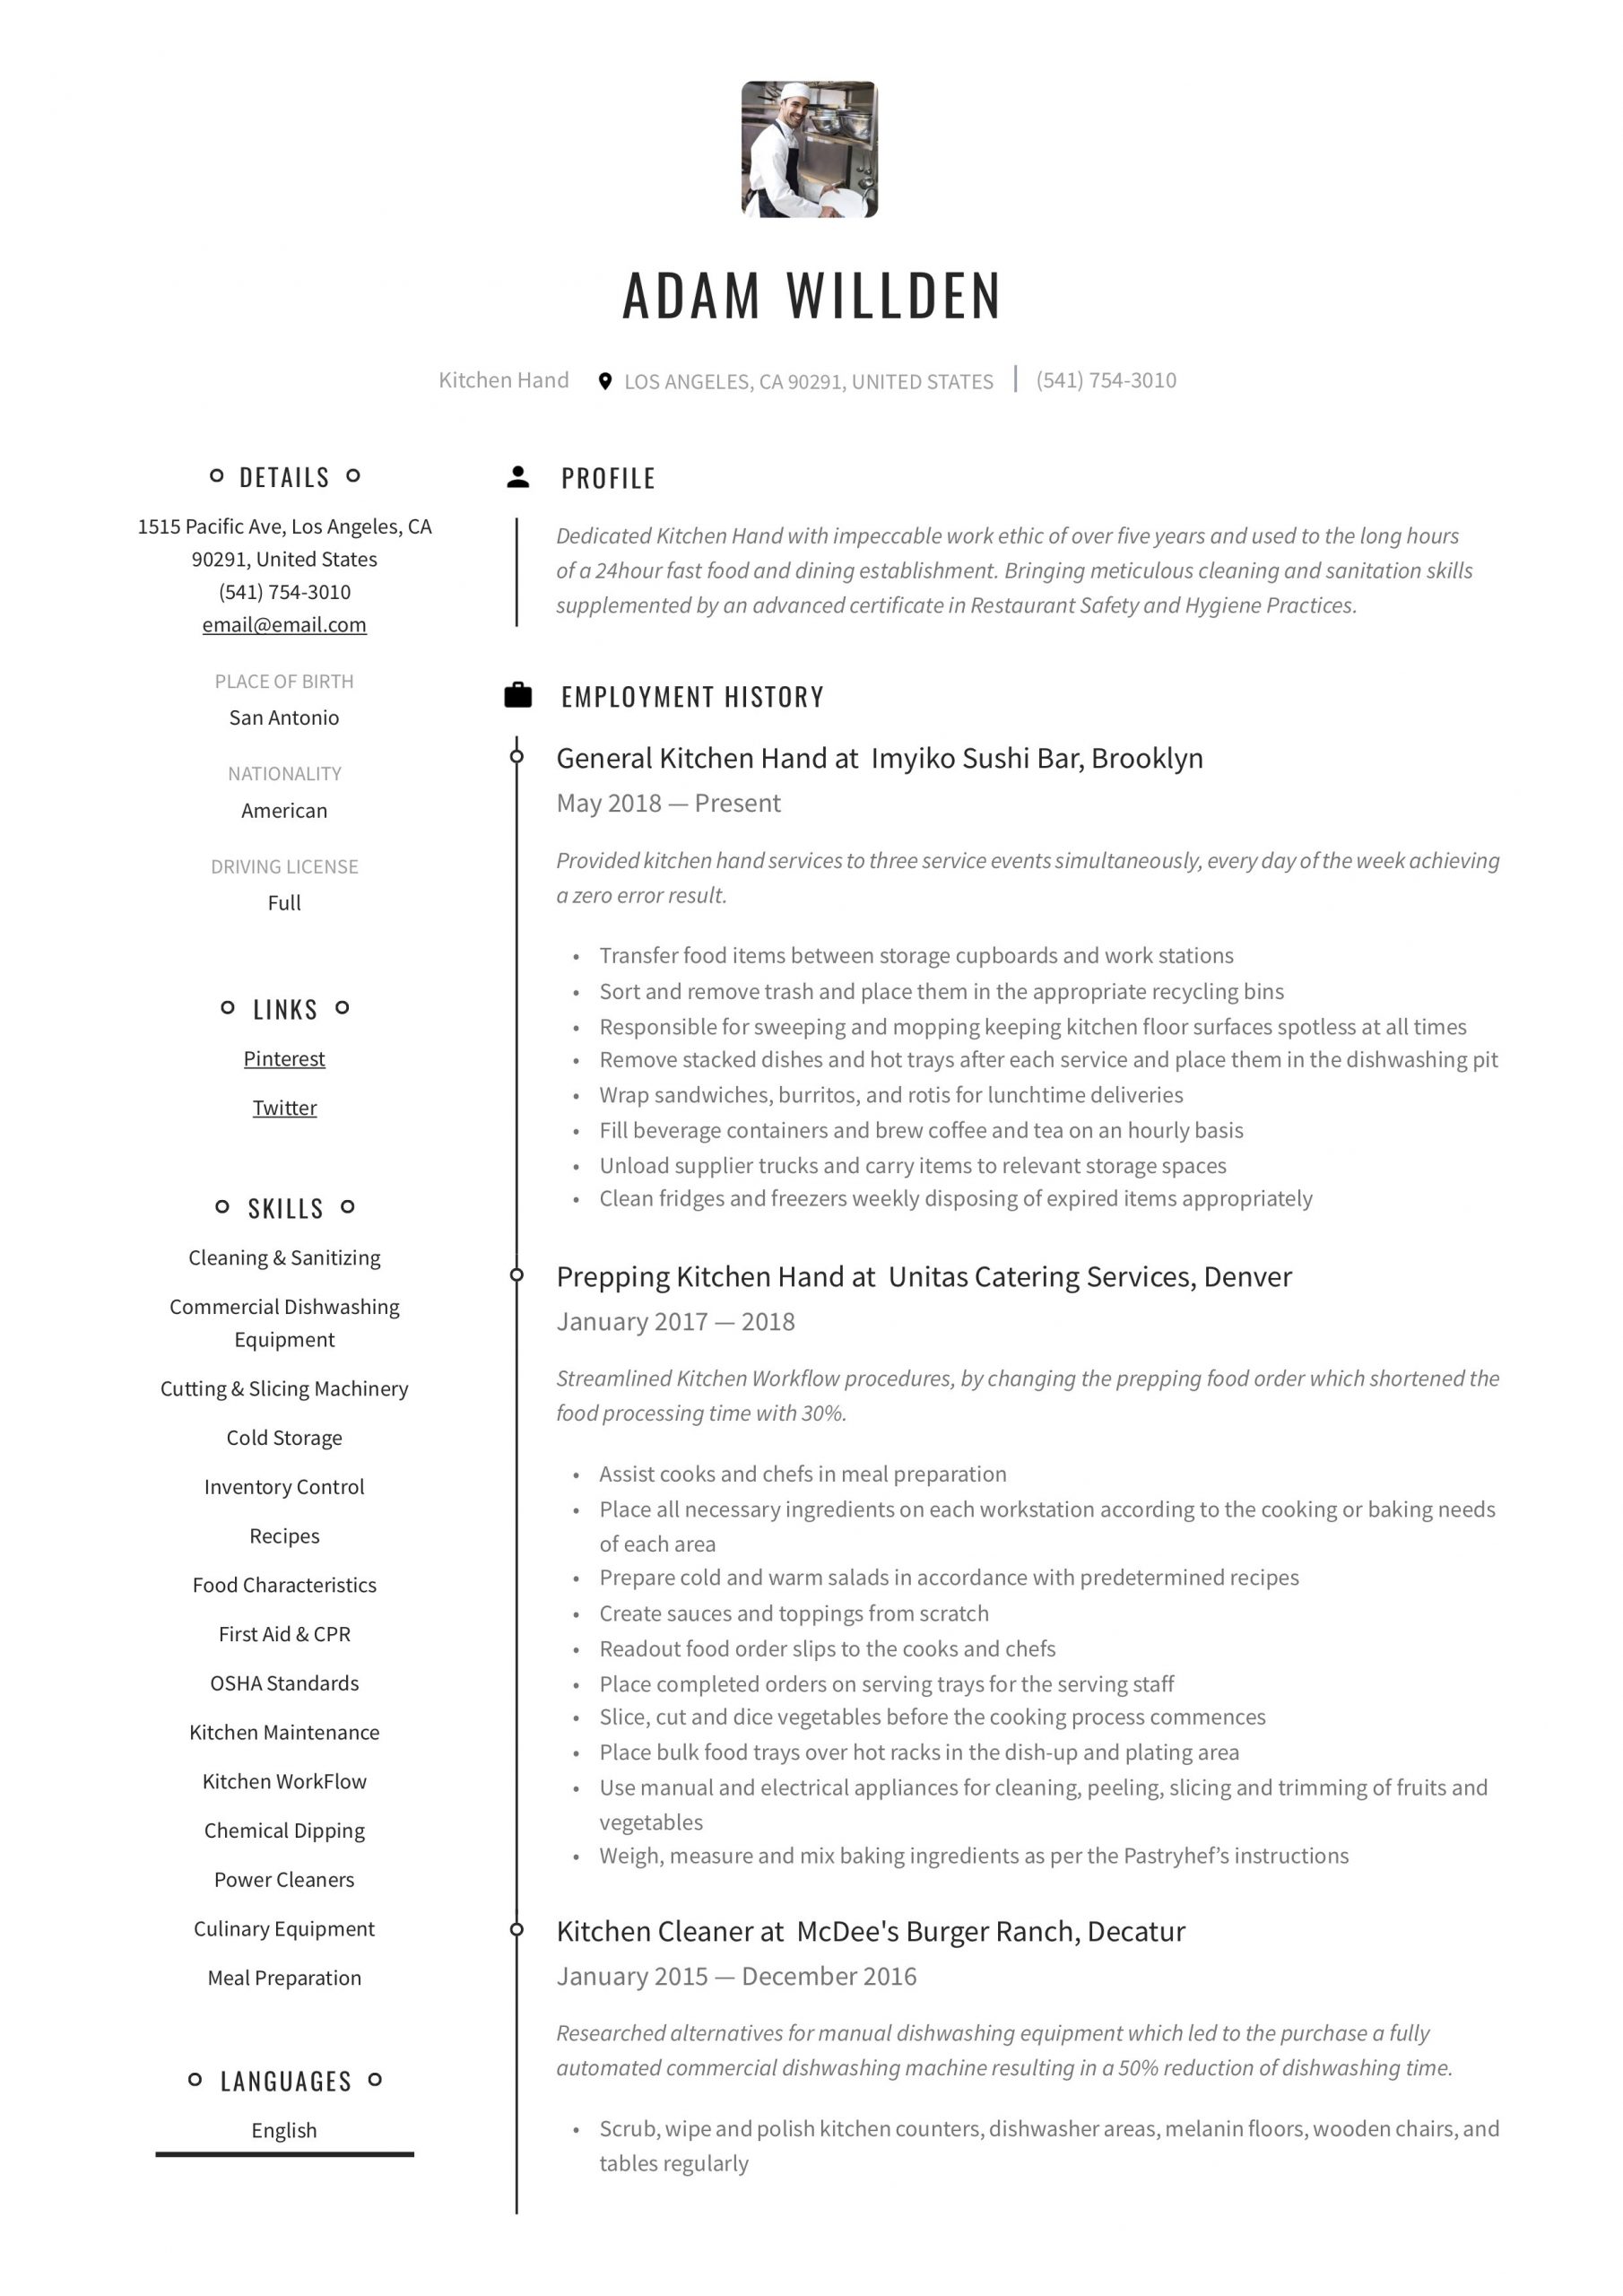 Sample Resume for Restaurant Kitchen Hand Kitchen Hand Resume & Writing Guide  12 Free Templates 2020